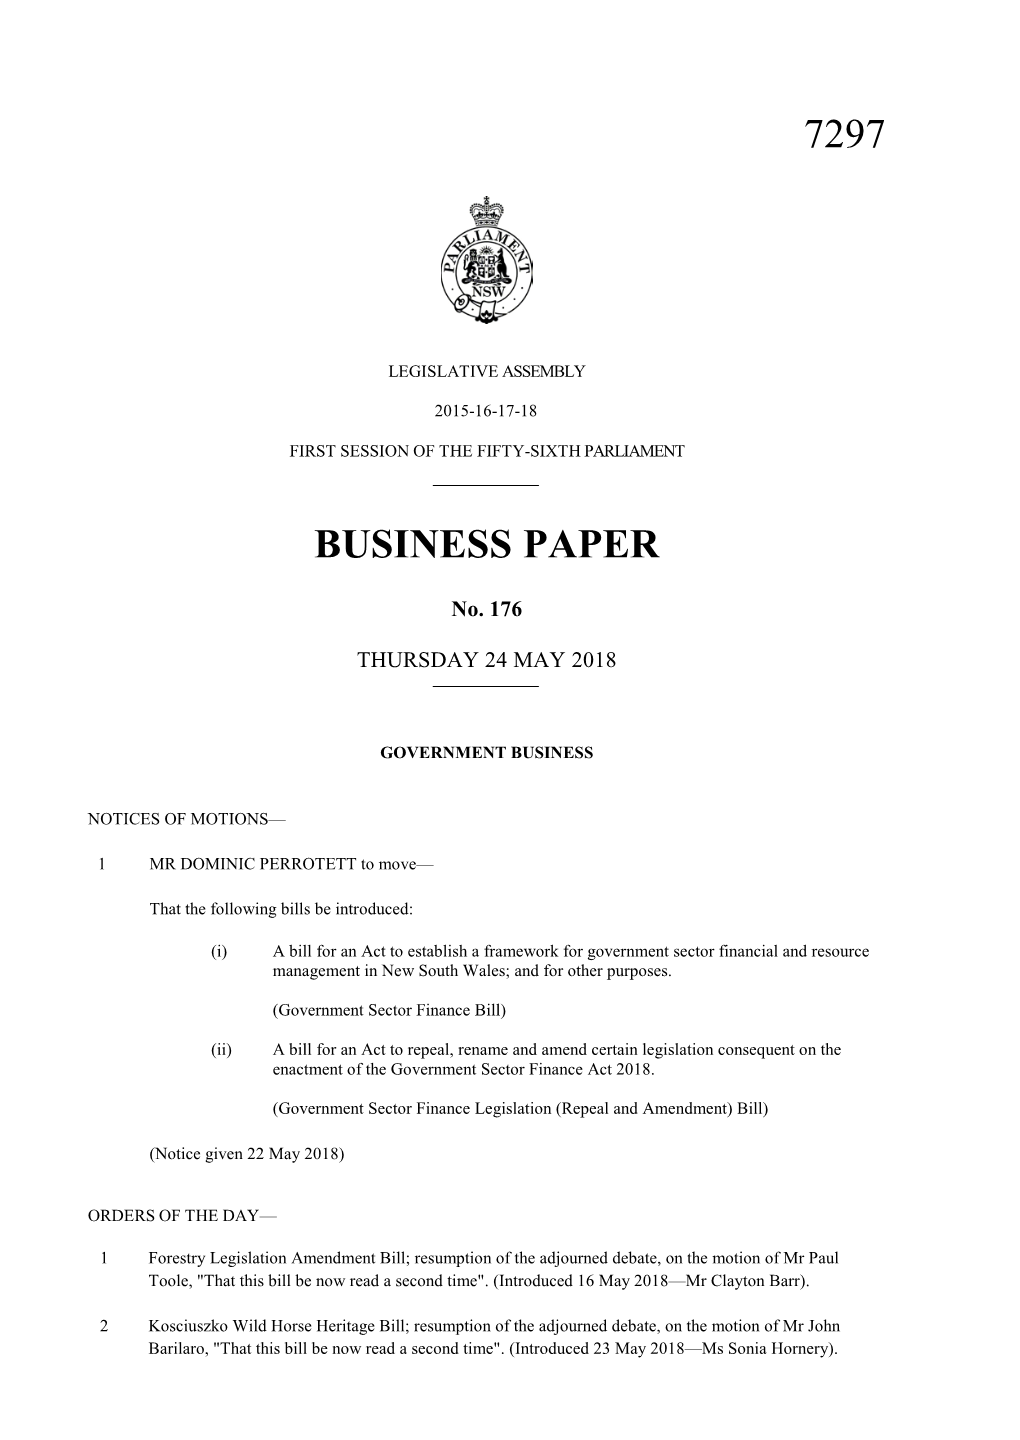 7297 Business Paper